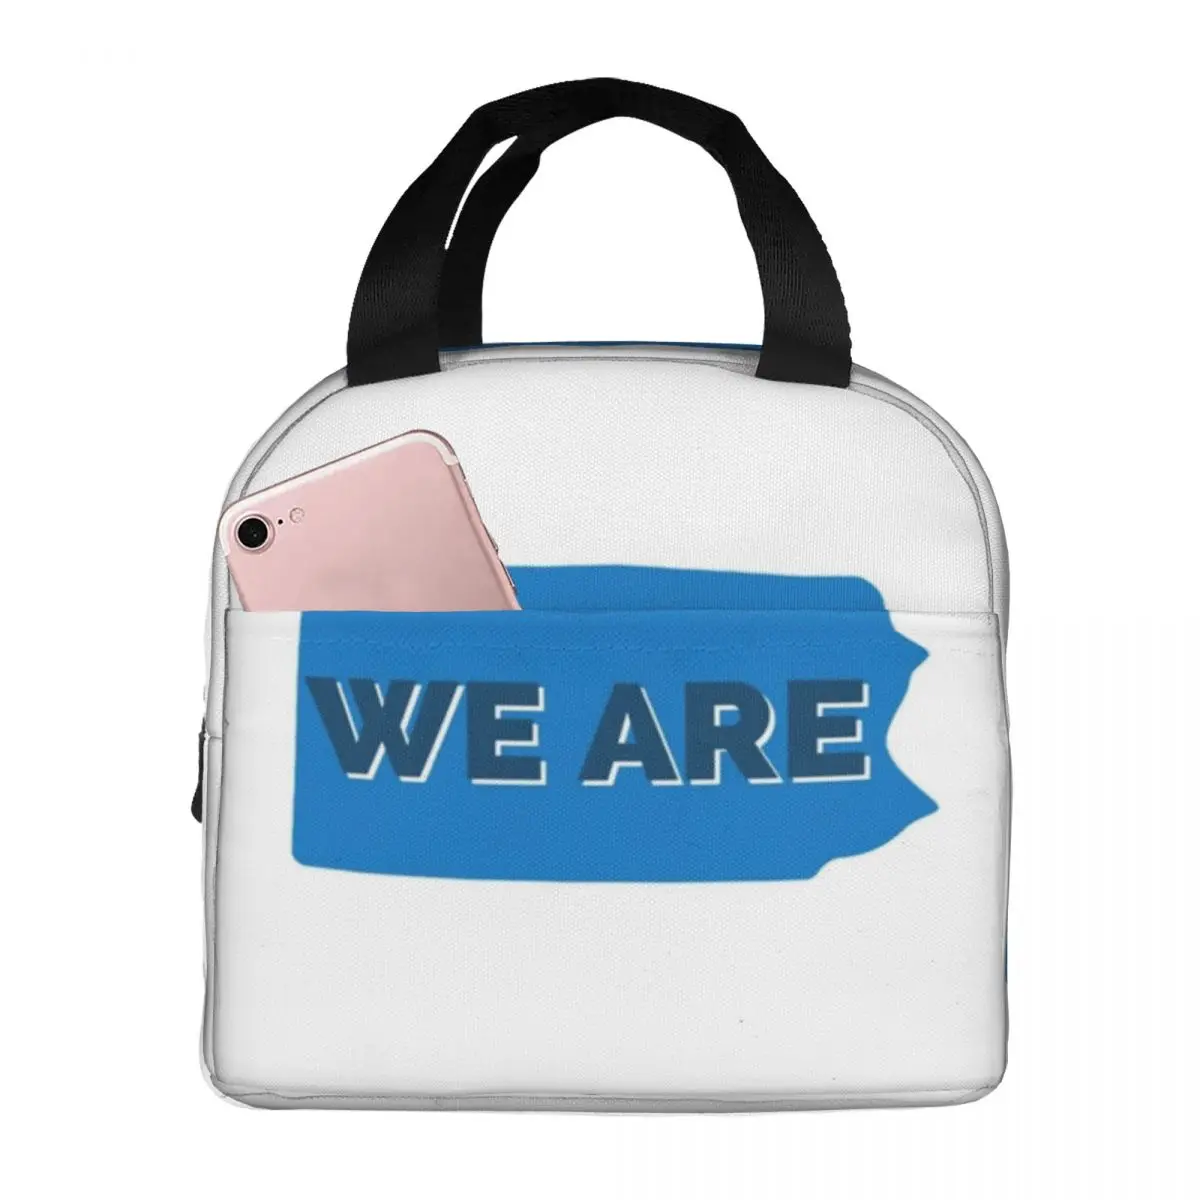 

We Are Thermal Insulated Lunch Bags Reusable Food Handbags Portable Tote Lunch Box School Teacher